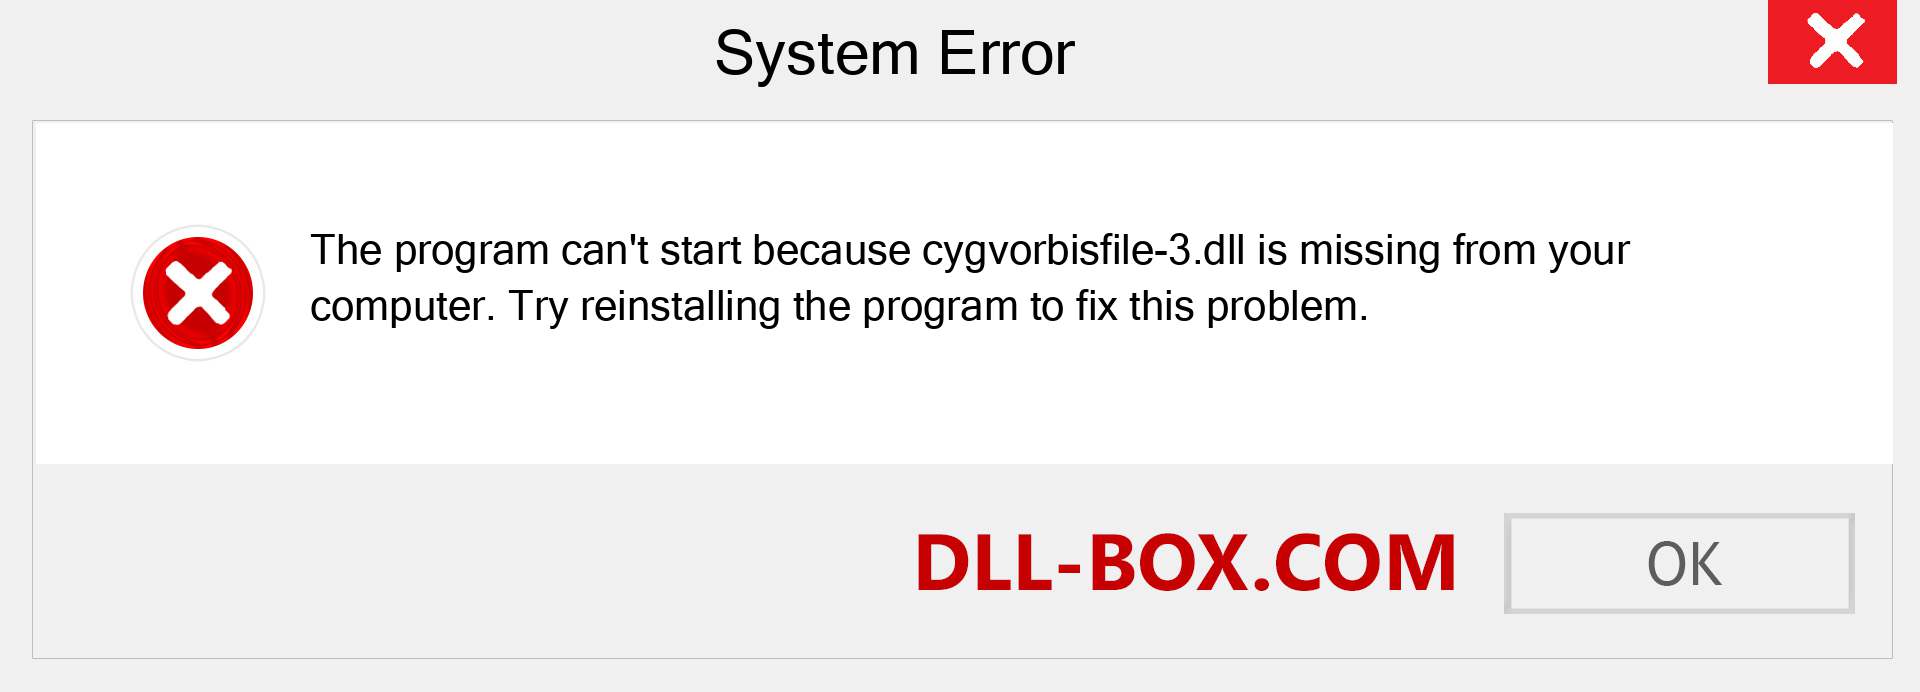  cygvorbisfile-3.dll file is missing?. Download for Windows 7, 8, 10 - Fix  cygvorbisfile-3 dll Missing Error on Windows, photos, images